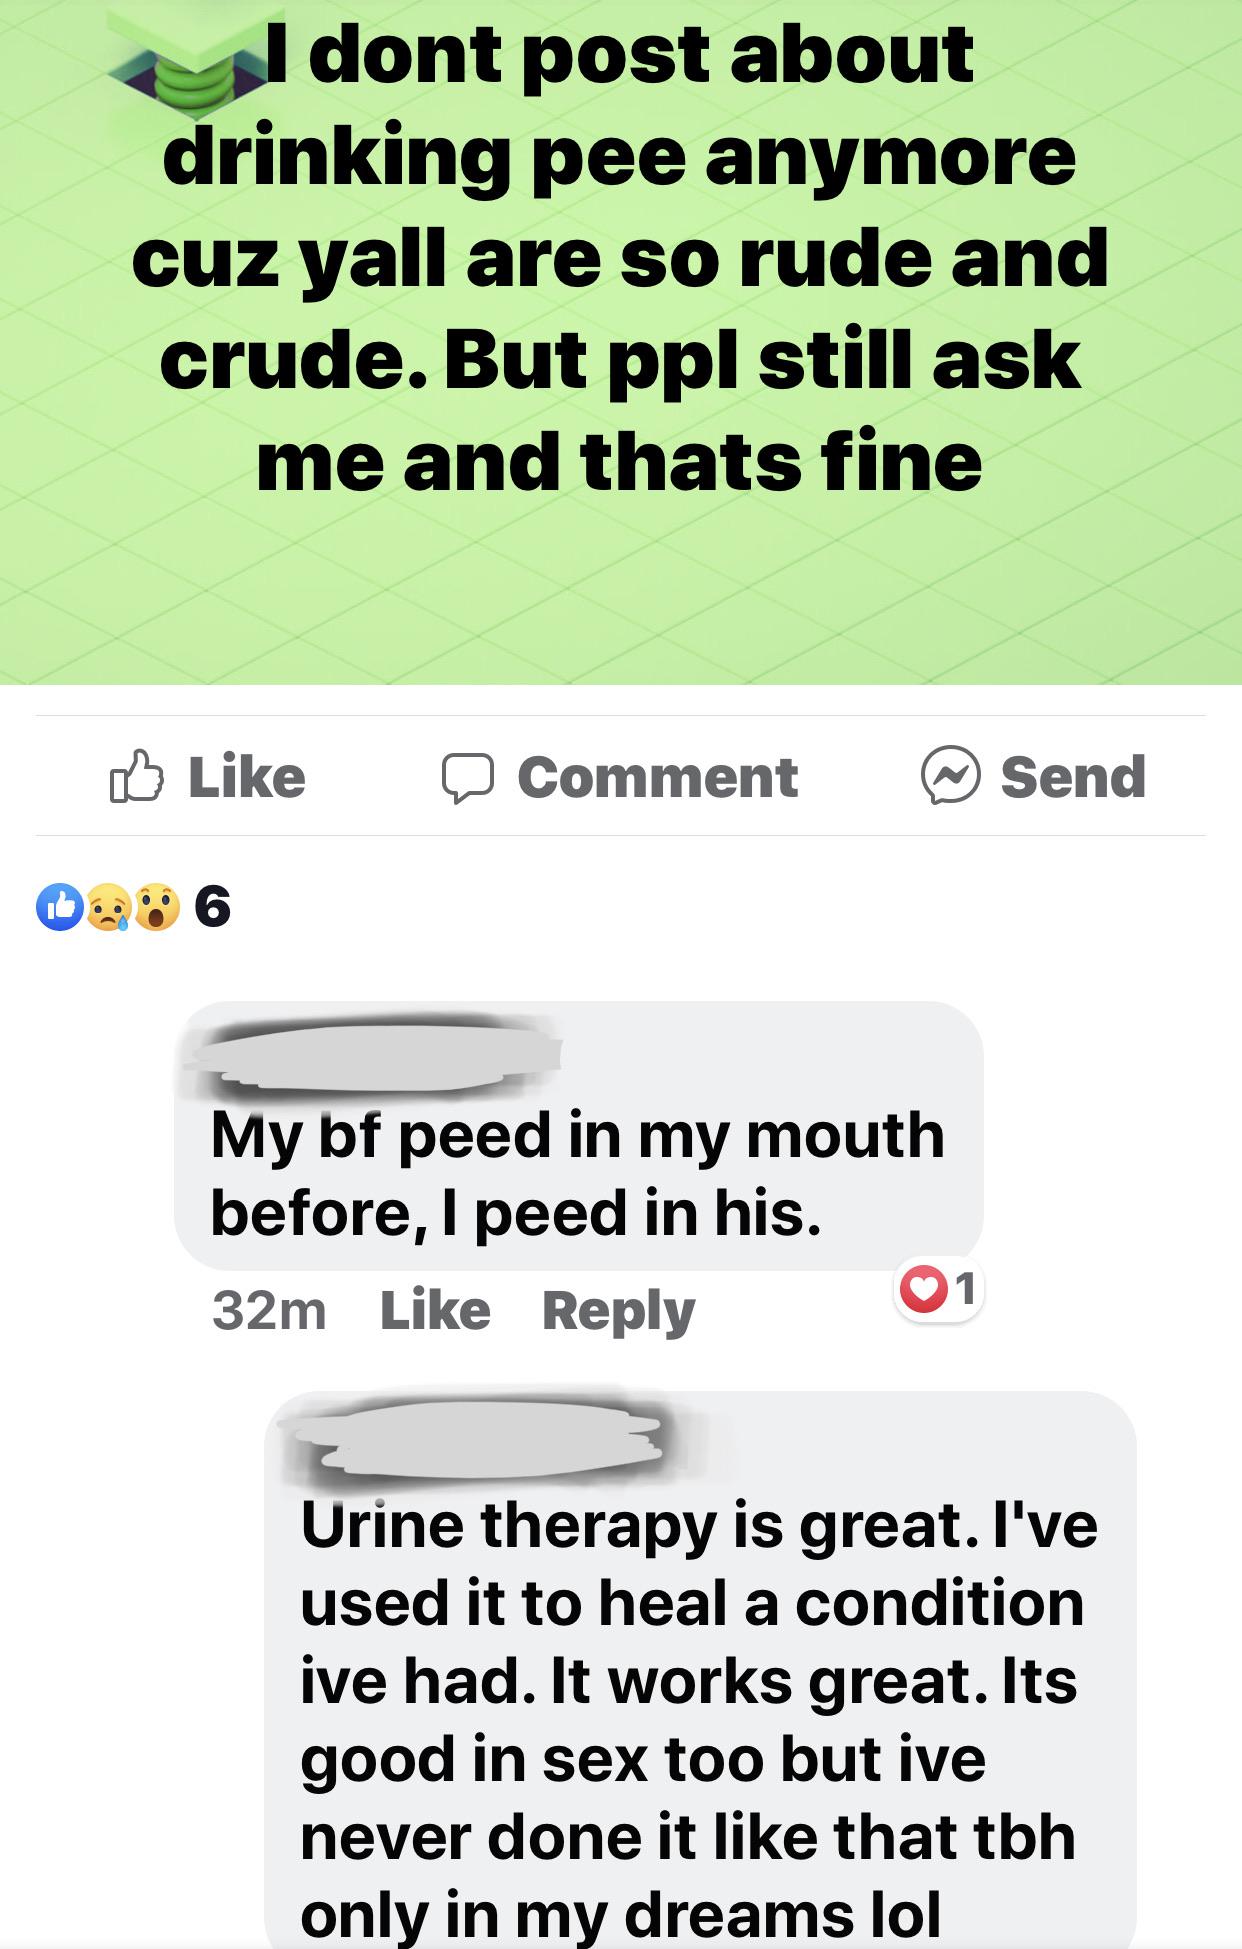 wing profile - I dont post about drinking pee anymore cuz yall are so rude and crude. But ppl still ask me and thats fine a Comment @ Send My bf peed in my mouth before, I peed in his. 32m 01 Urine therapy is great. I've used it to heal a condition ive ha